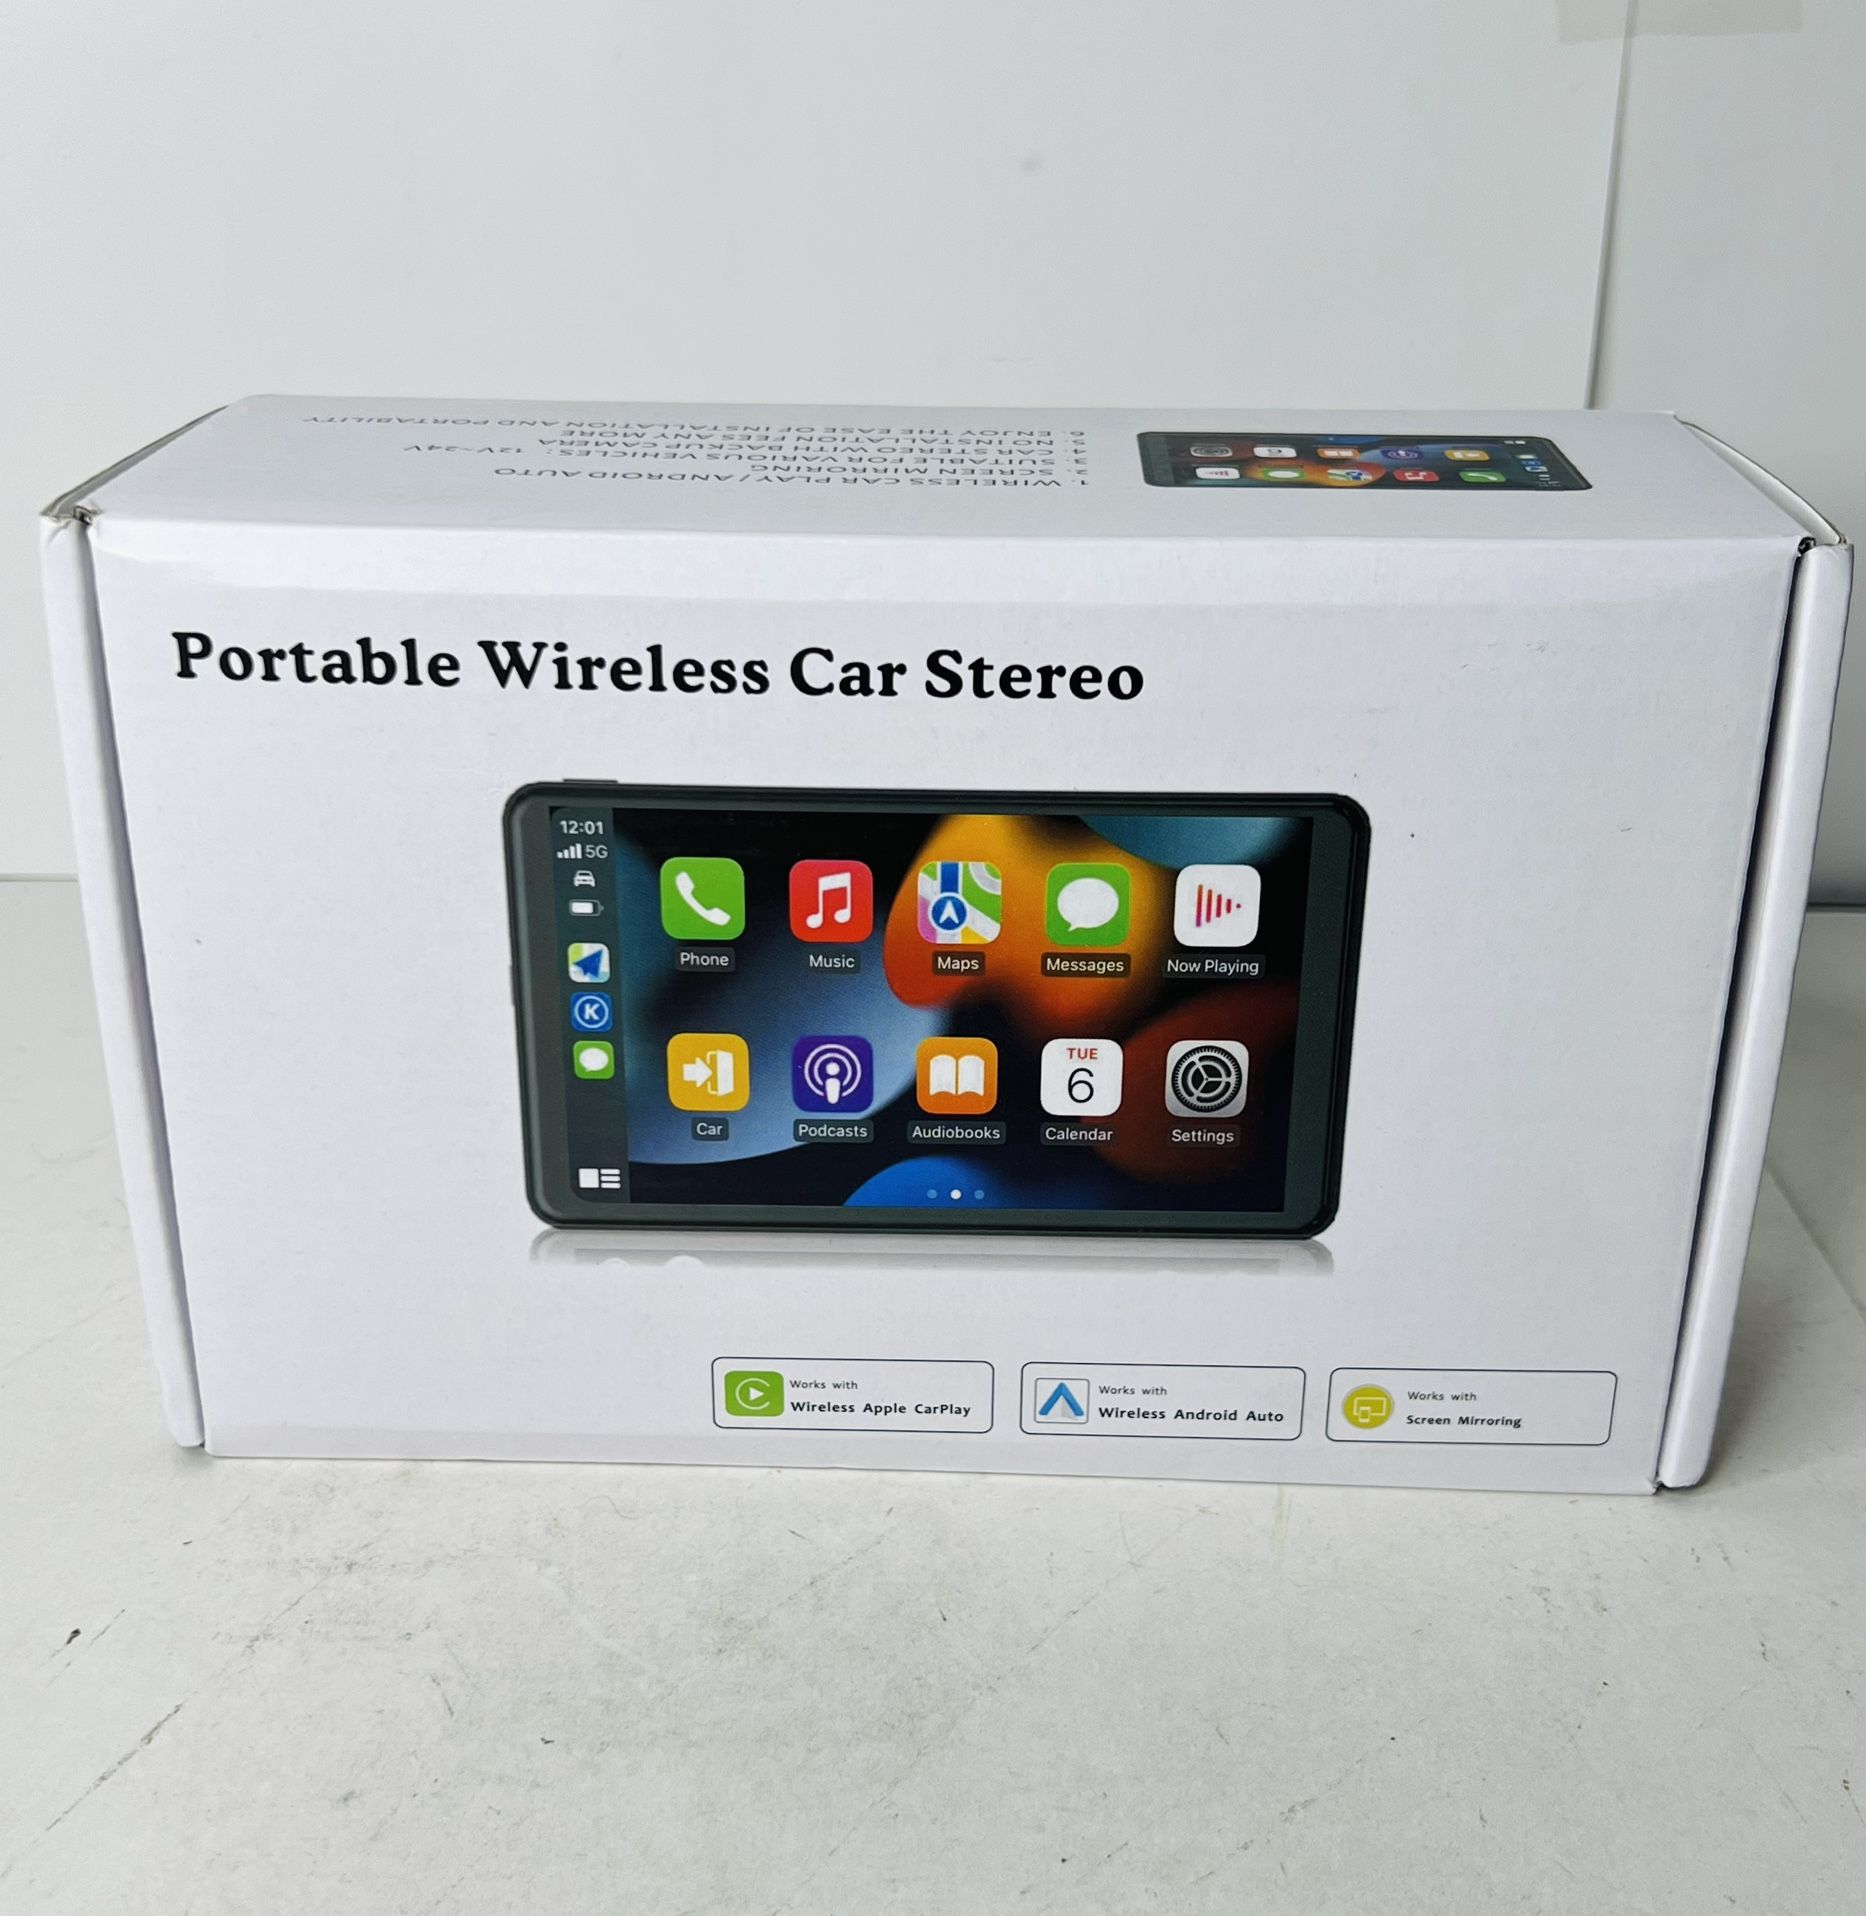 Portable Wireless Car Stereo 7in Touchscreen Multimedia Player 